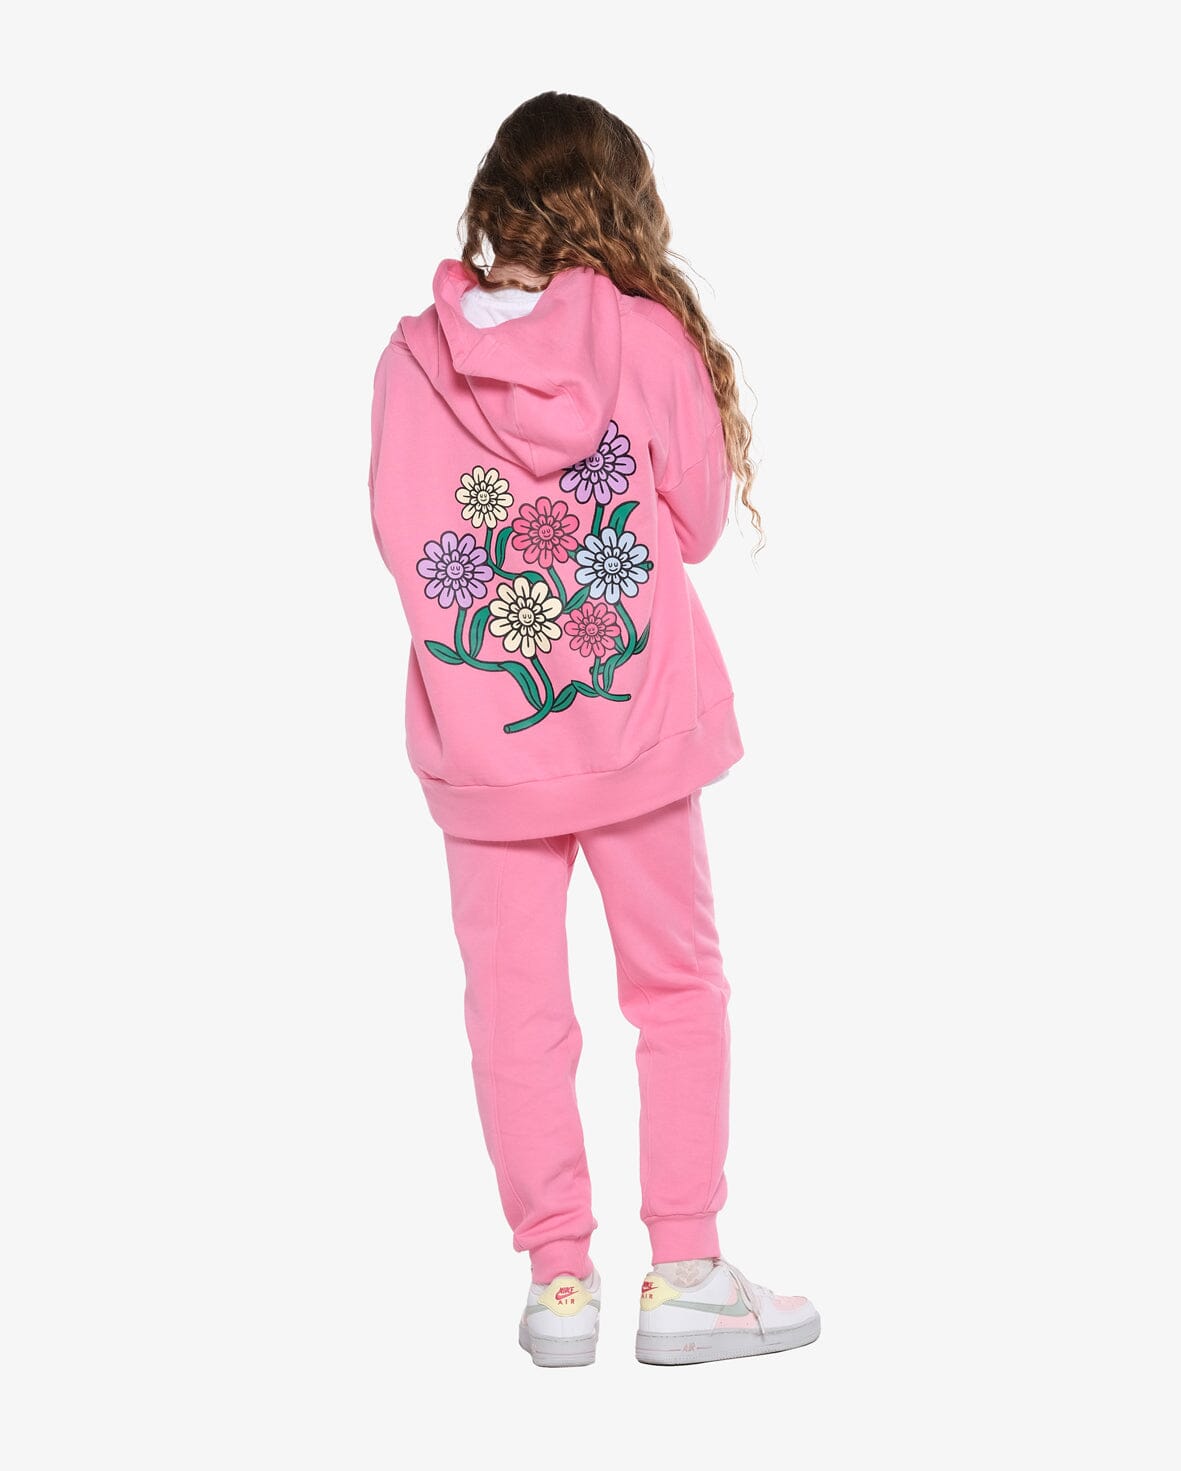 The Girl Club - Candy Pink Fleece Joggers - Candy Pink Girls The Girl Club